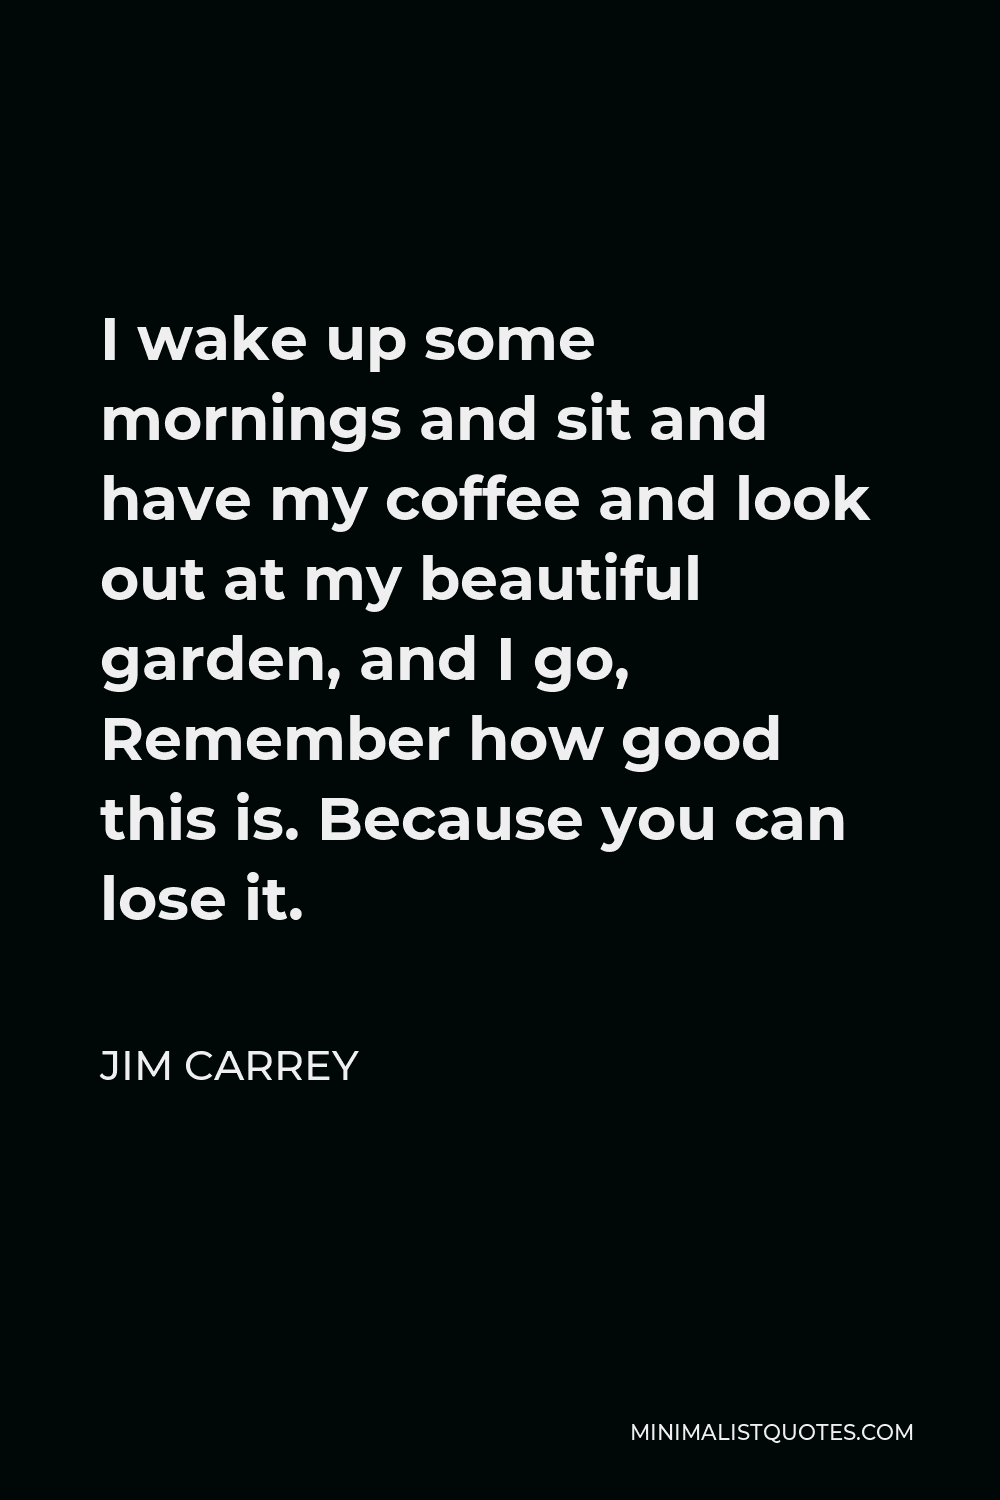 Jim Carrey Quote - I wake up some mornings and sit and have my coffee and look out at my beautiful garden, and I go, Remember how good this is. Because you can lose it.